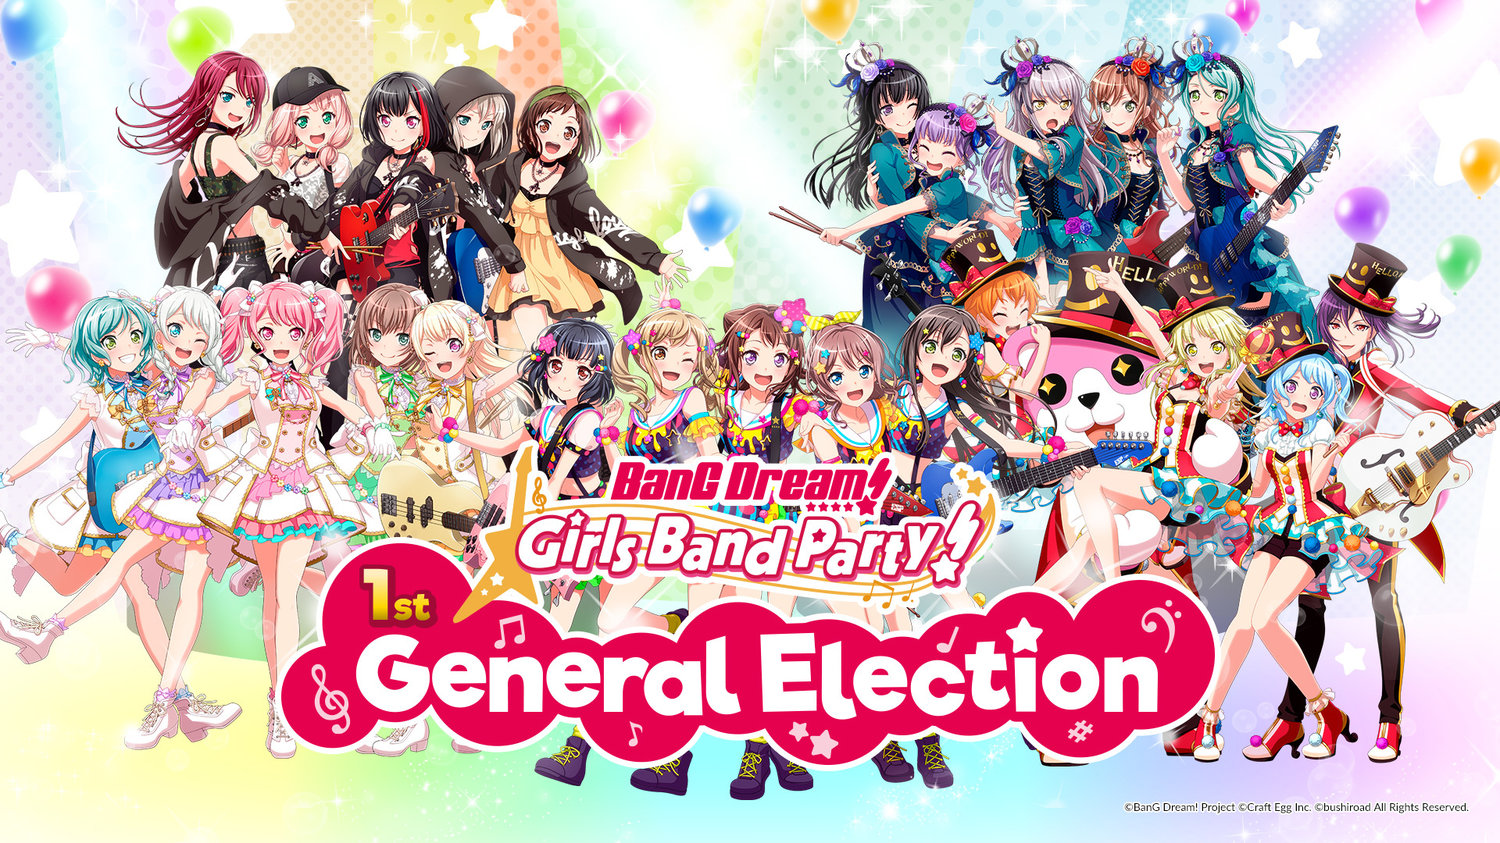 BanG Dream! Updates on X: The voting rankings for the various bands are  now updated on the BanG Dream! Girls Band Challenge webpage, just like in  the anime!   / X